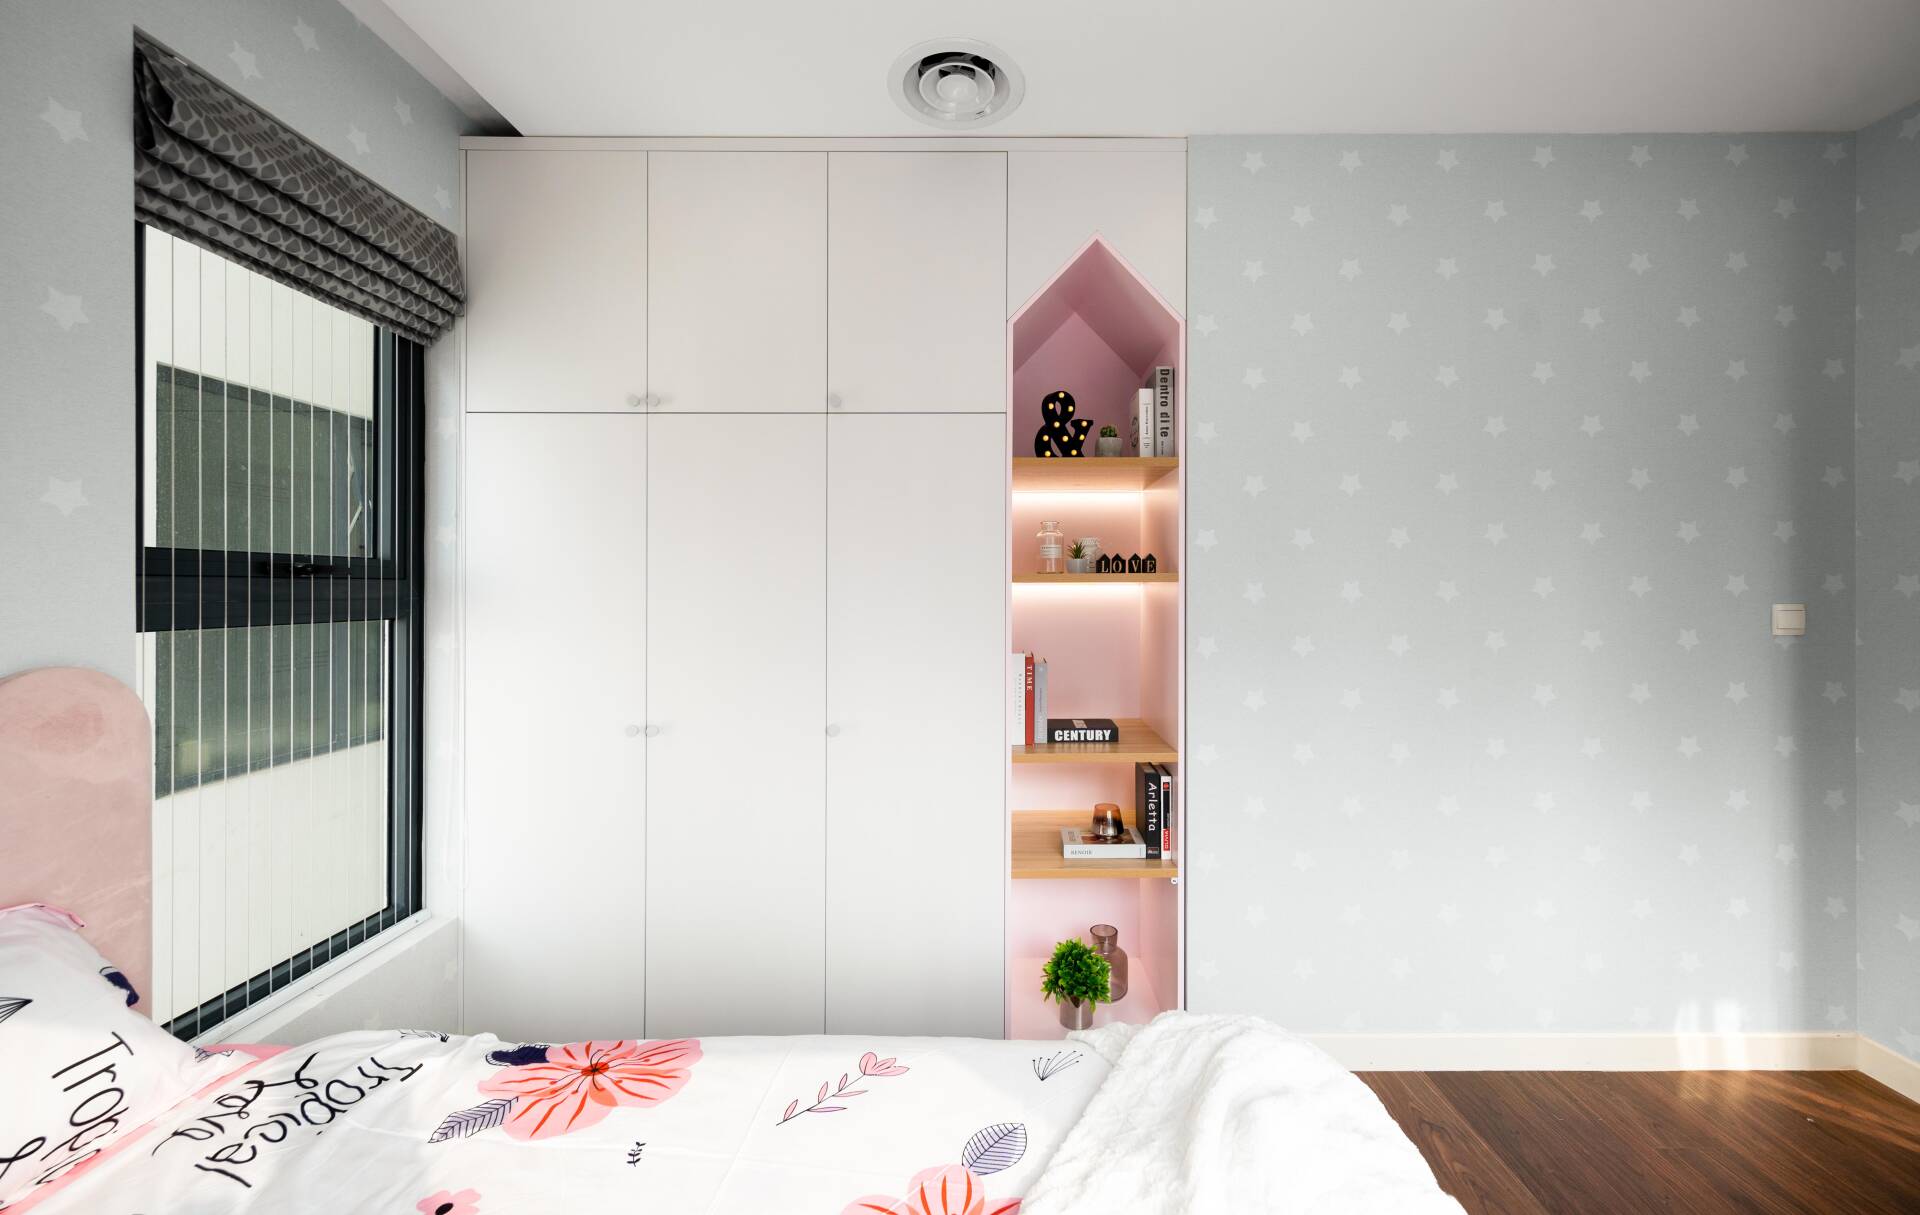 The recessed wardrobe combines with bookshelves to help optimize the area.